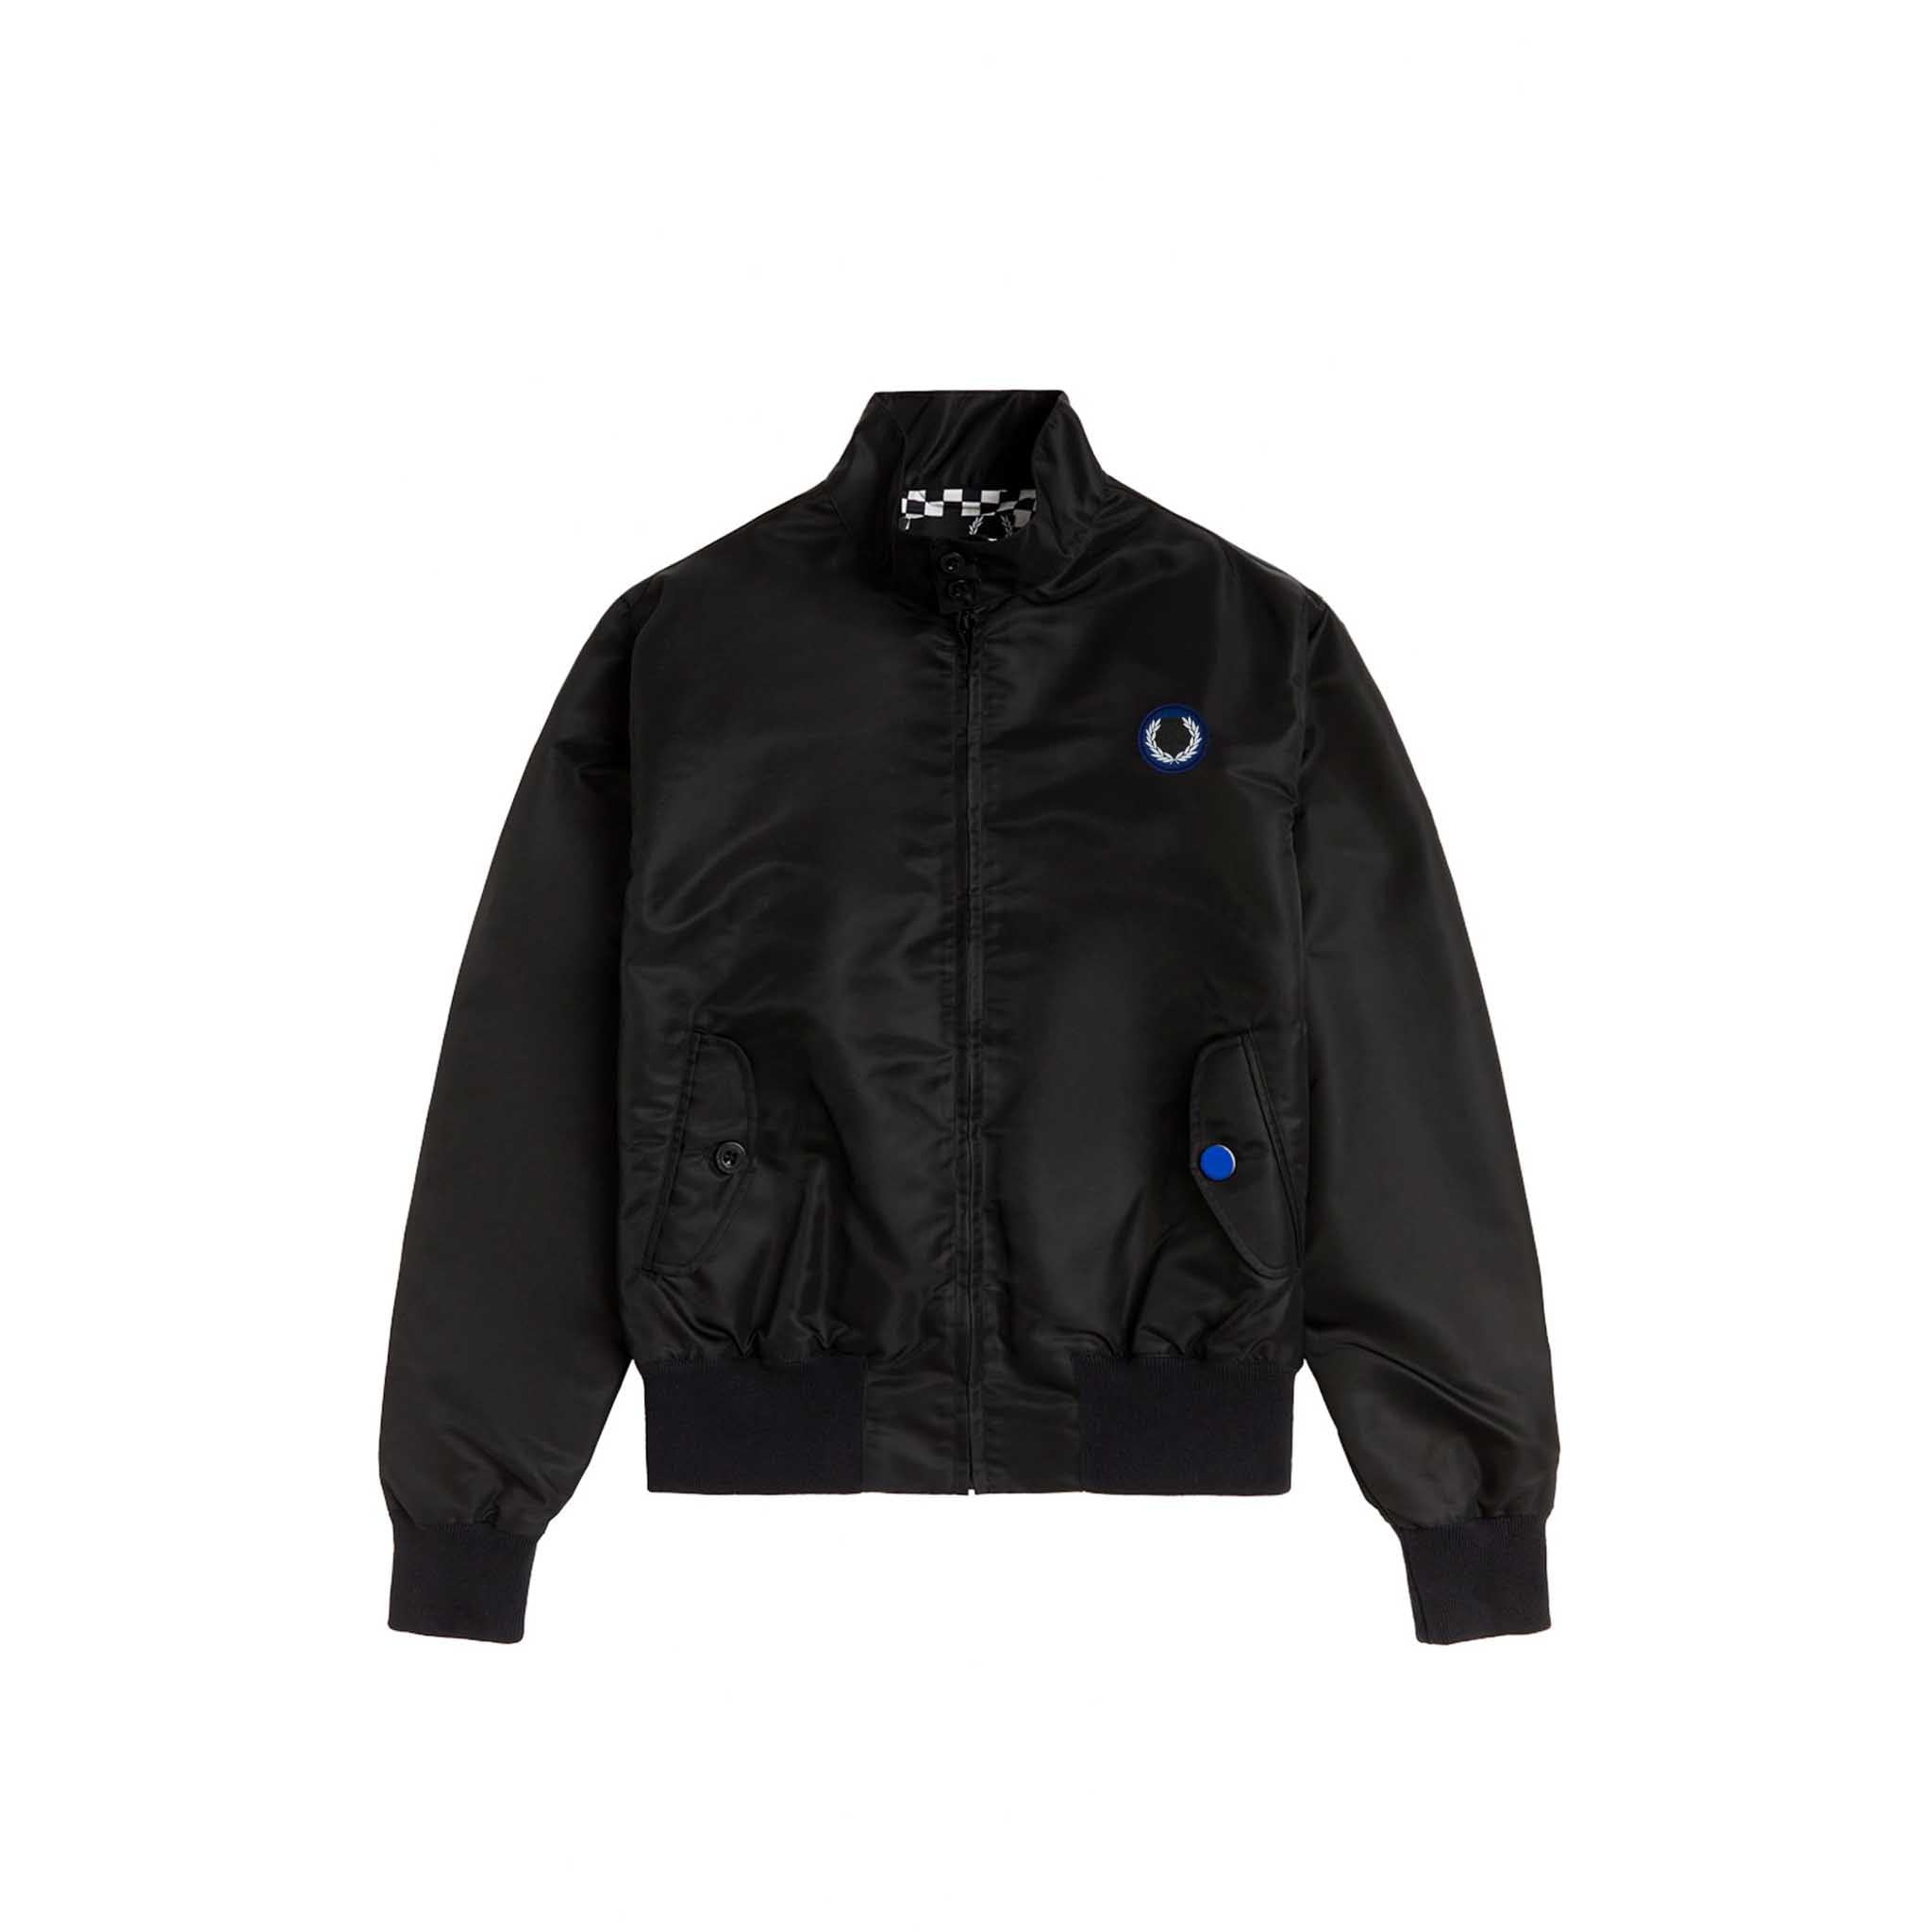 Fred Perry x Raf Simons Patched Harrington Jacket Black